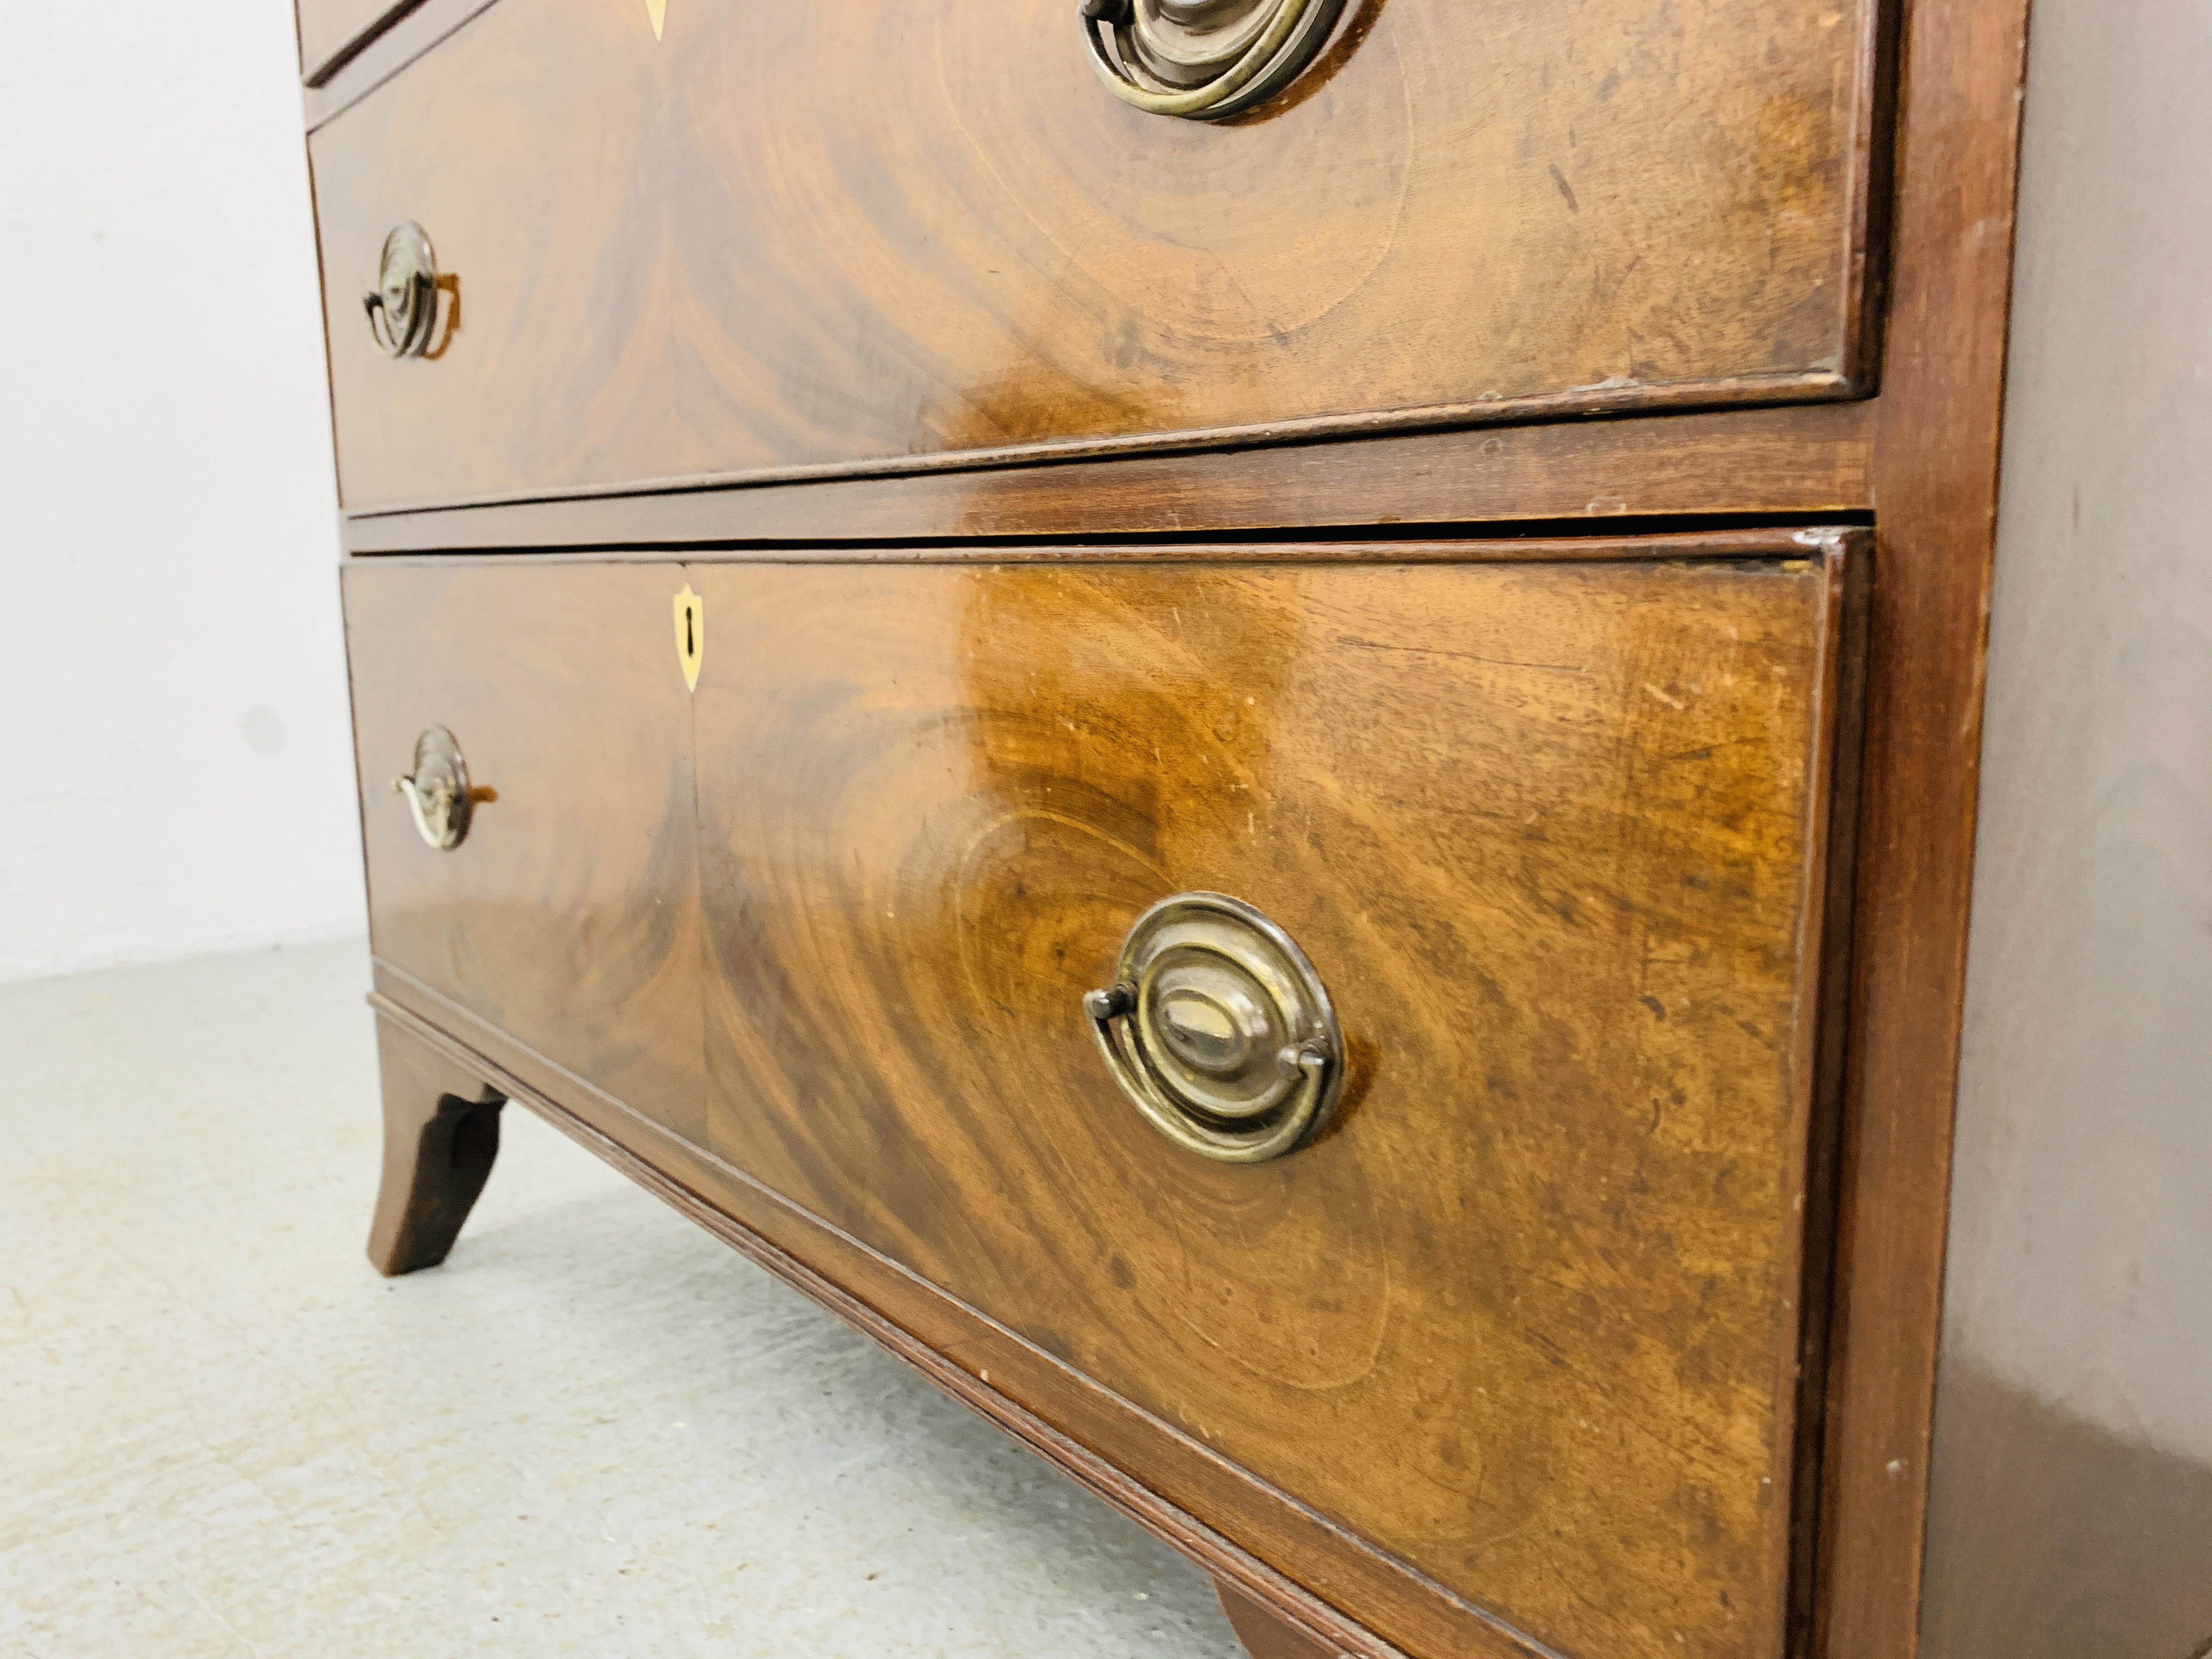 AN EARLY C19TH VINTAGE FLAME MAHOGANY 3 DRAWER CHEST, OVAL BRASS HANDLES ON SPLAYED LEGS - W 89CM. - Image 8 of 10